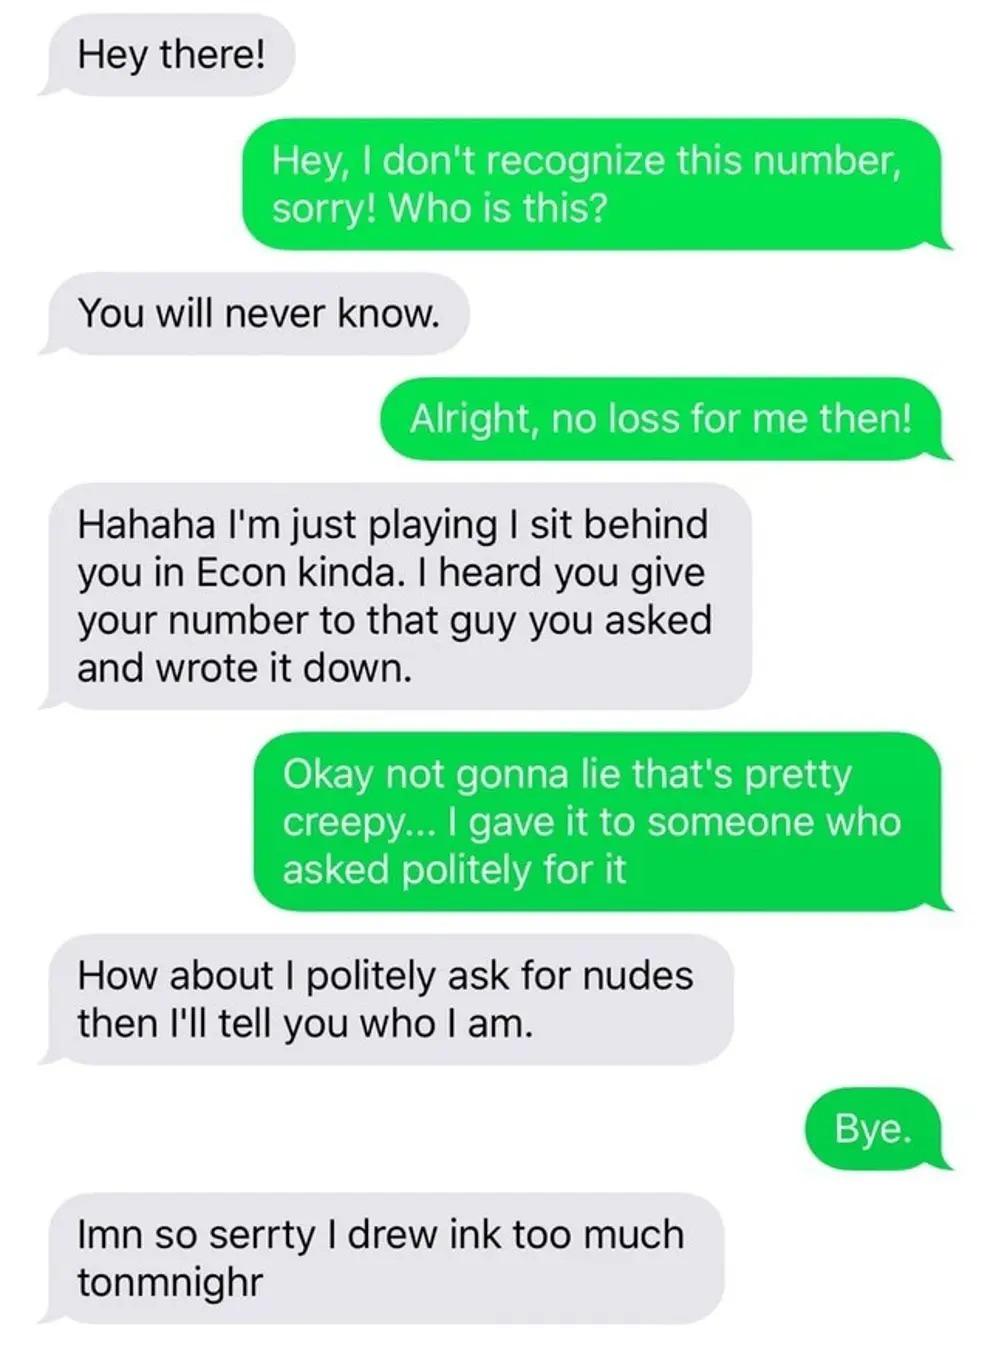 text not cringy - Hey there! Hey, I don't recognize this number, sorry! Who is this? You will never know. Alright, no loss for me then! Hahaha I'm just playing I sit behind you in Econ kinda. I heard you give your number to that guy you asked and wrote it